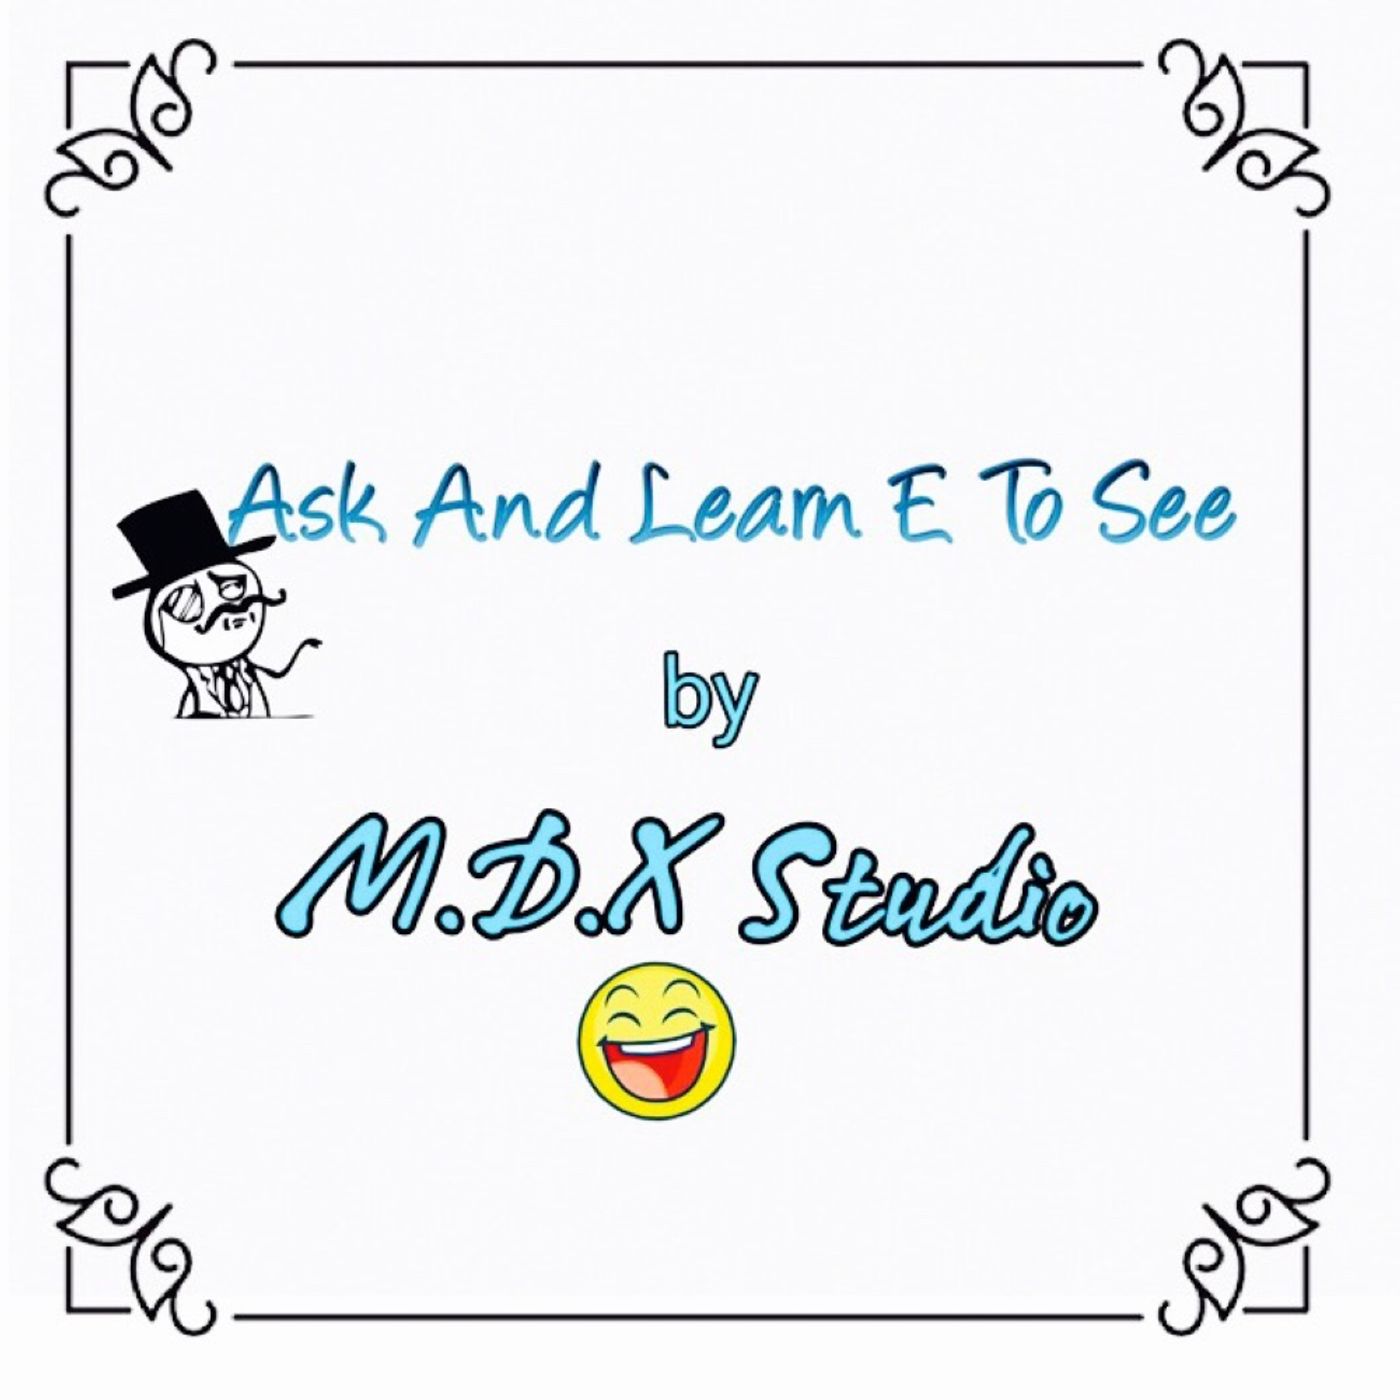 Ask And Learn E To See